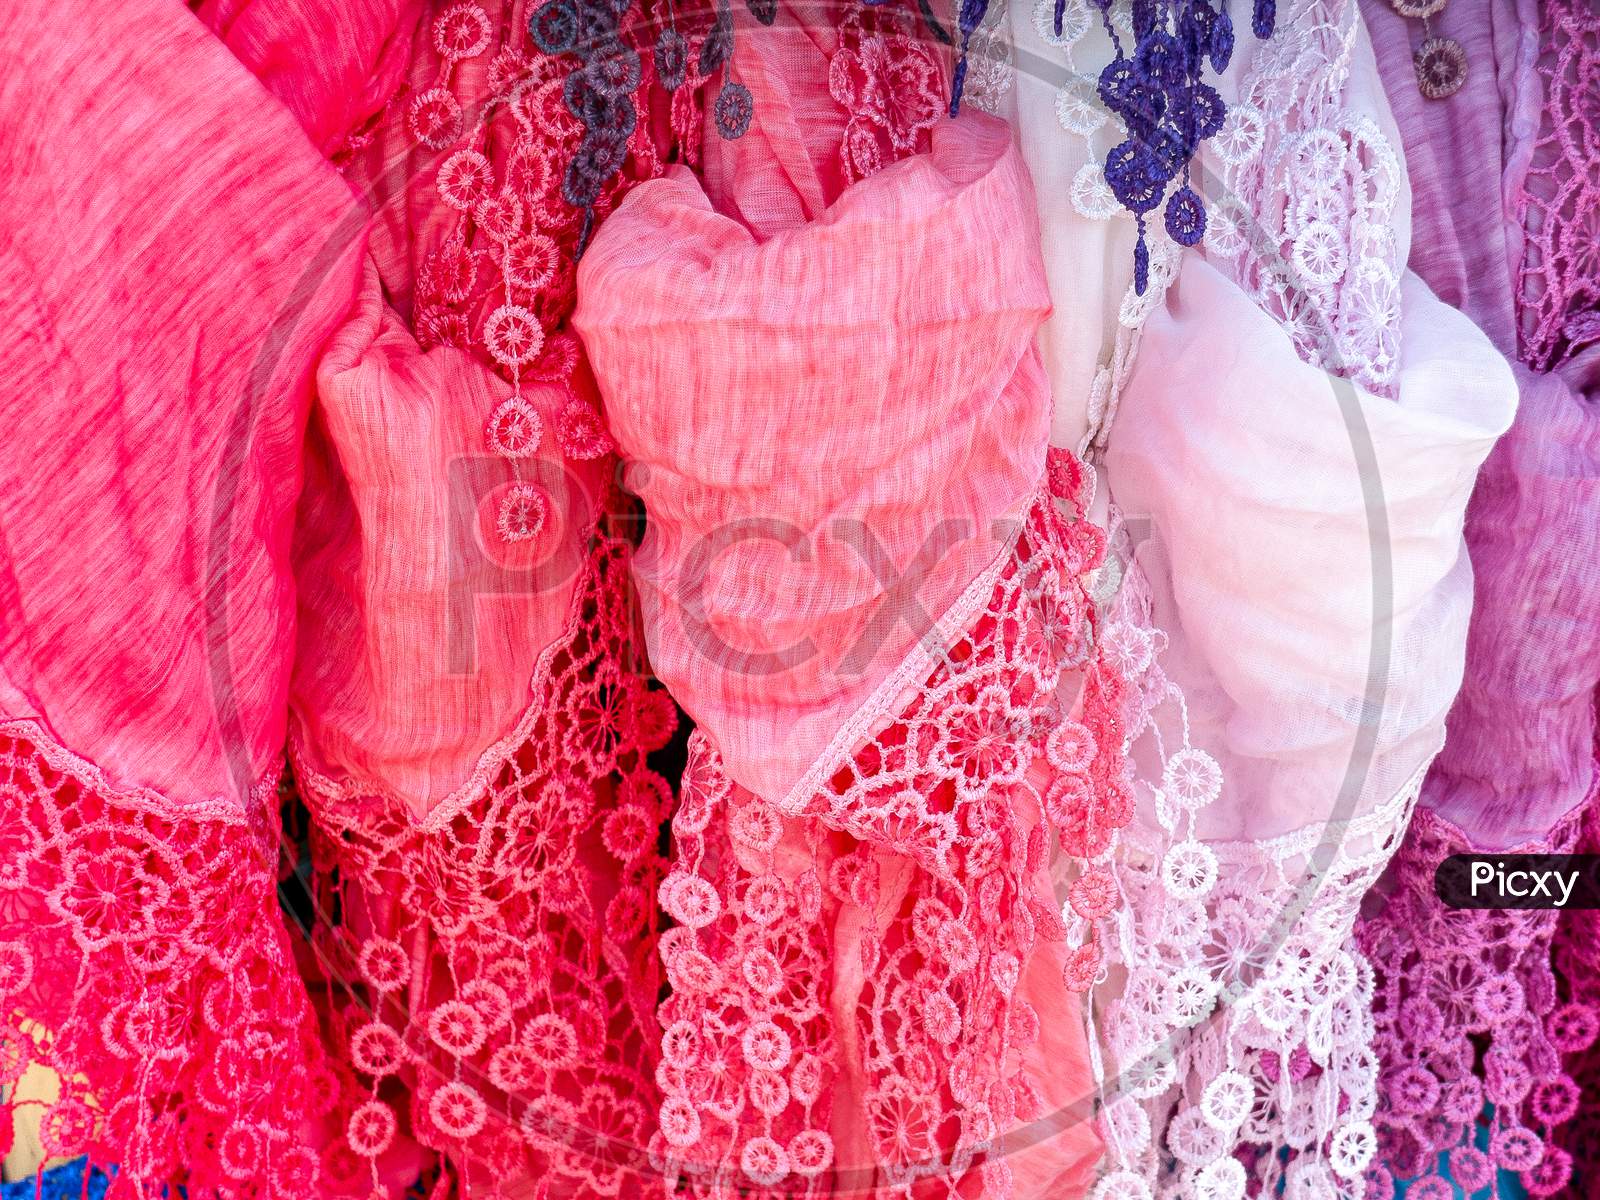 Silk Scarves On Display At A Market Stall In Fuengirola